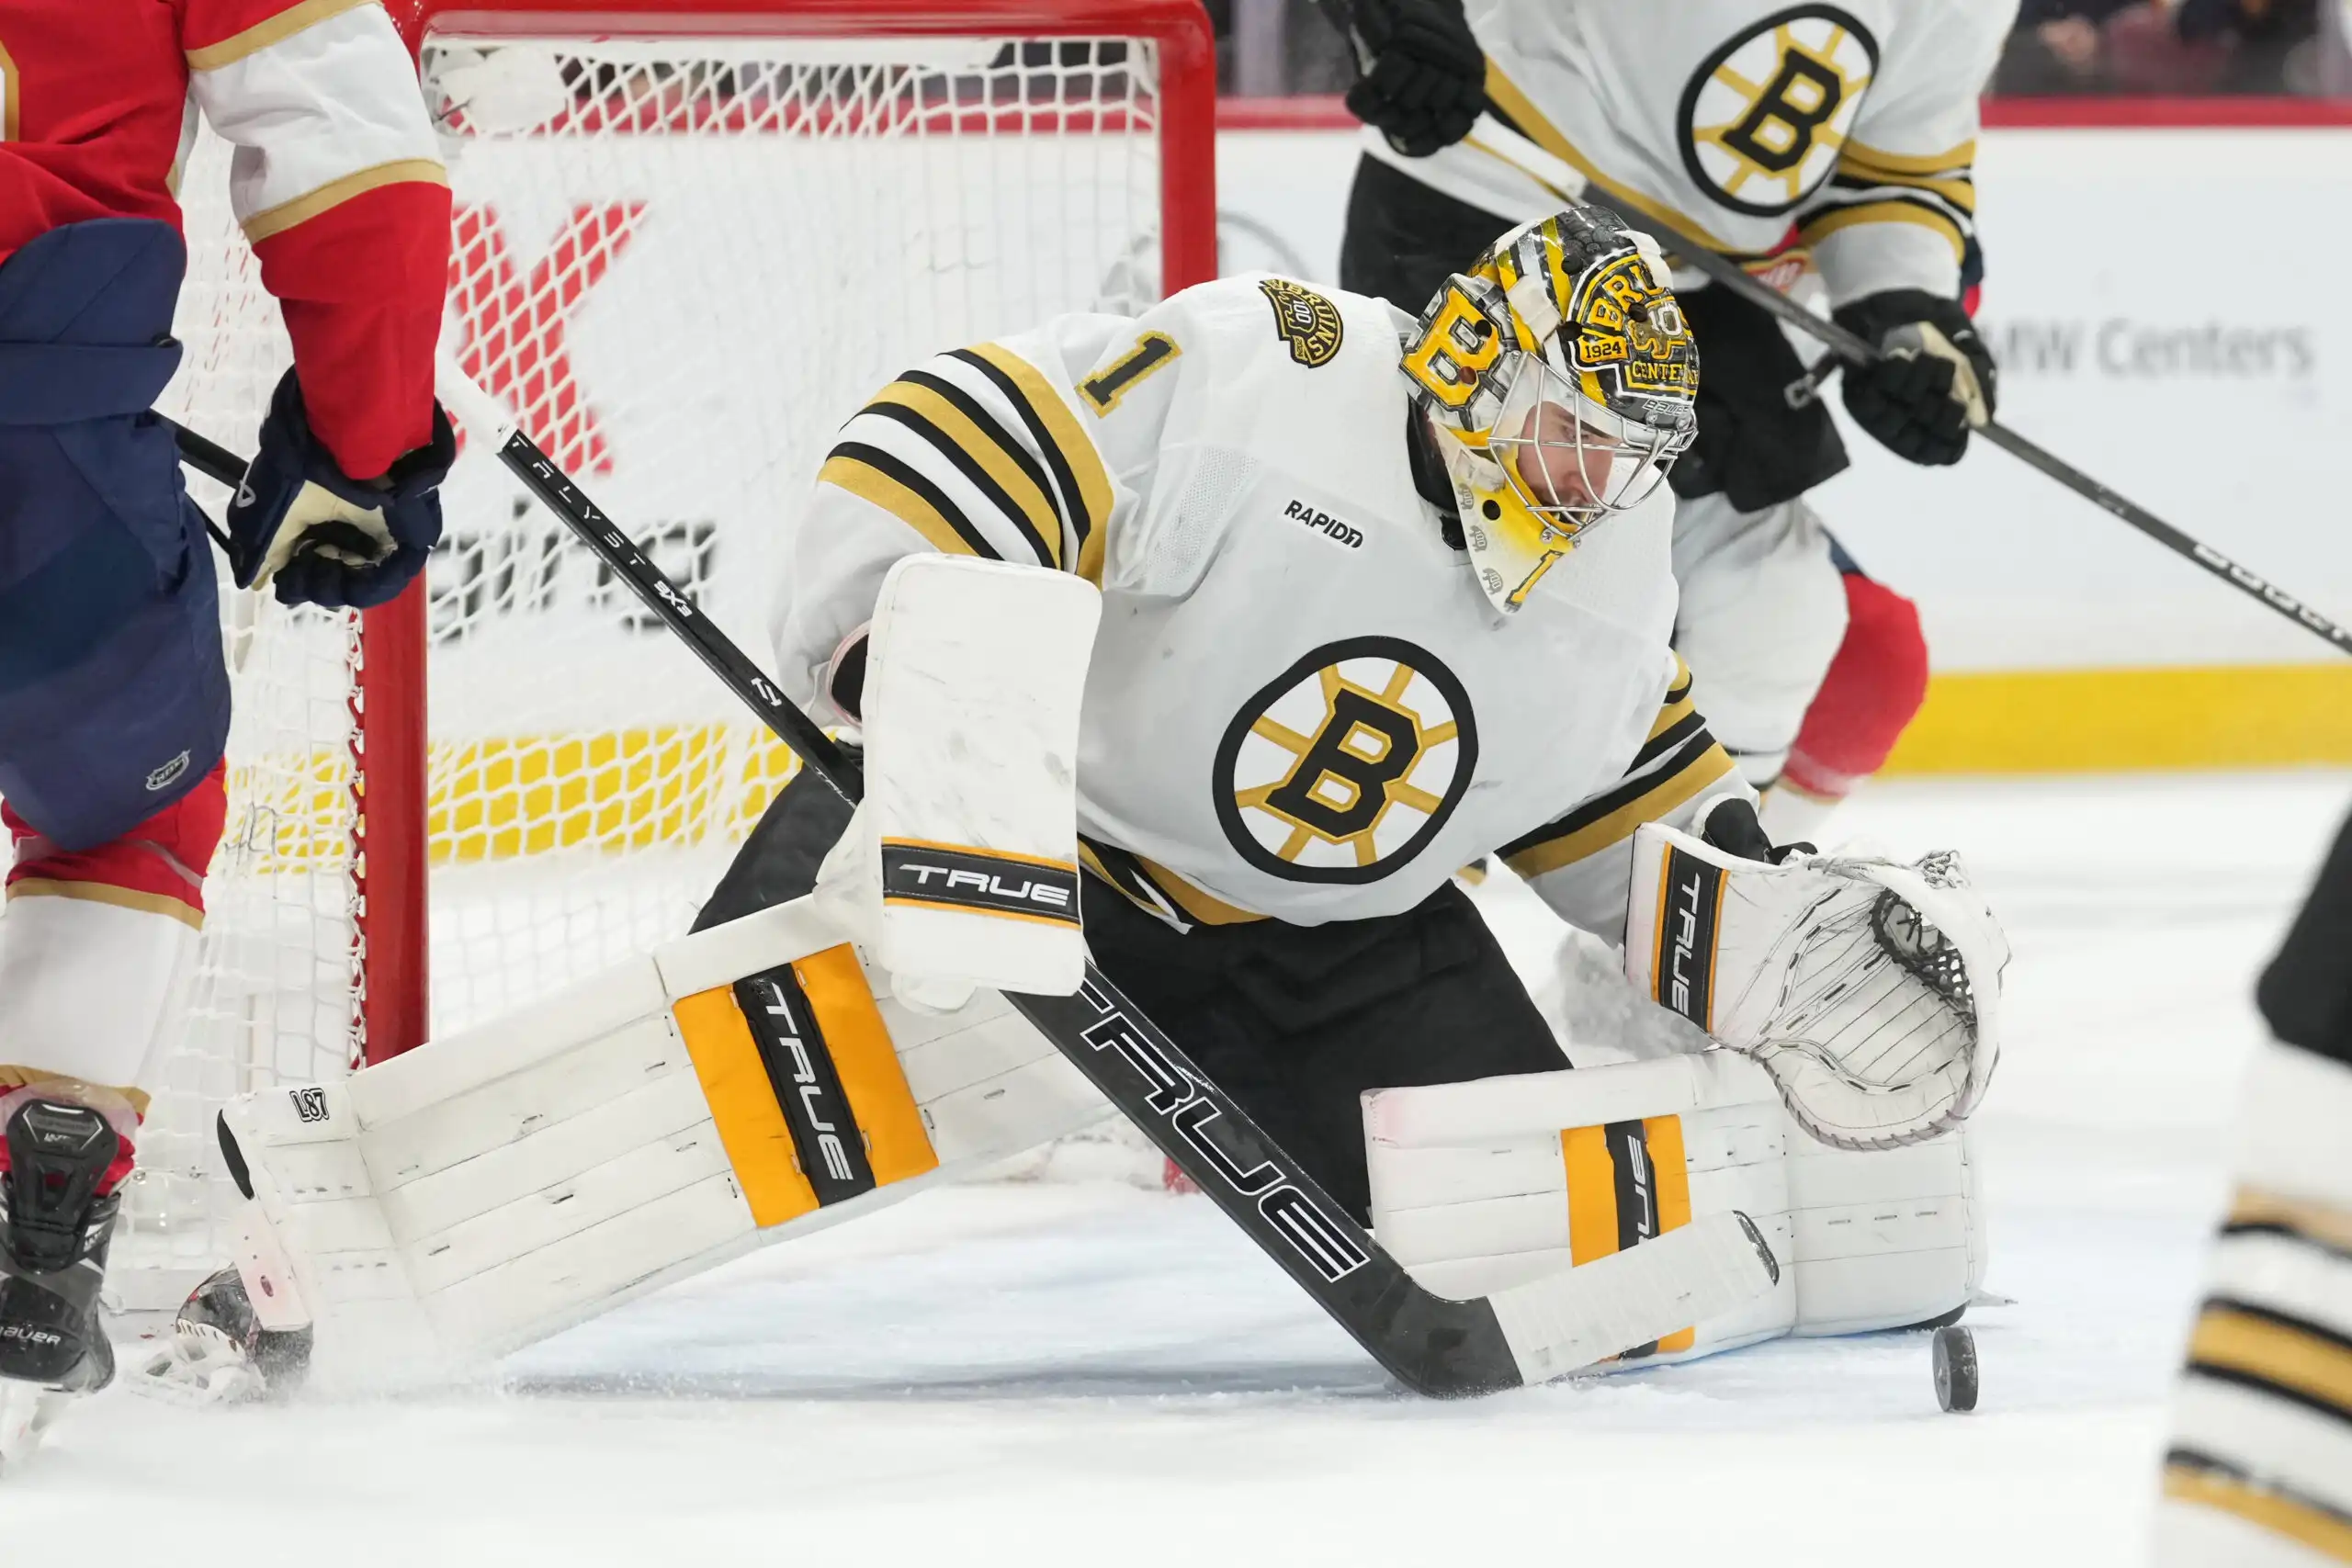 Bruins Desperation and Defensive Effort Lead to Game 6 - The Hockey Writers